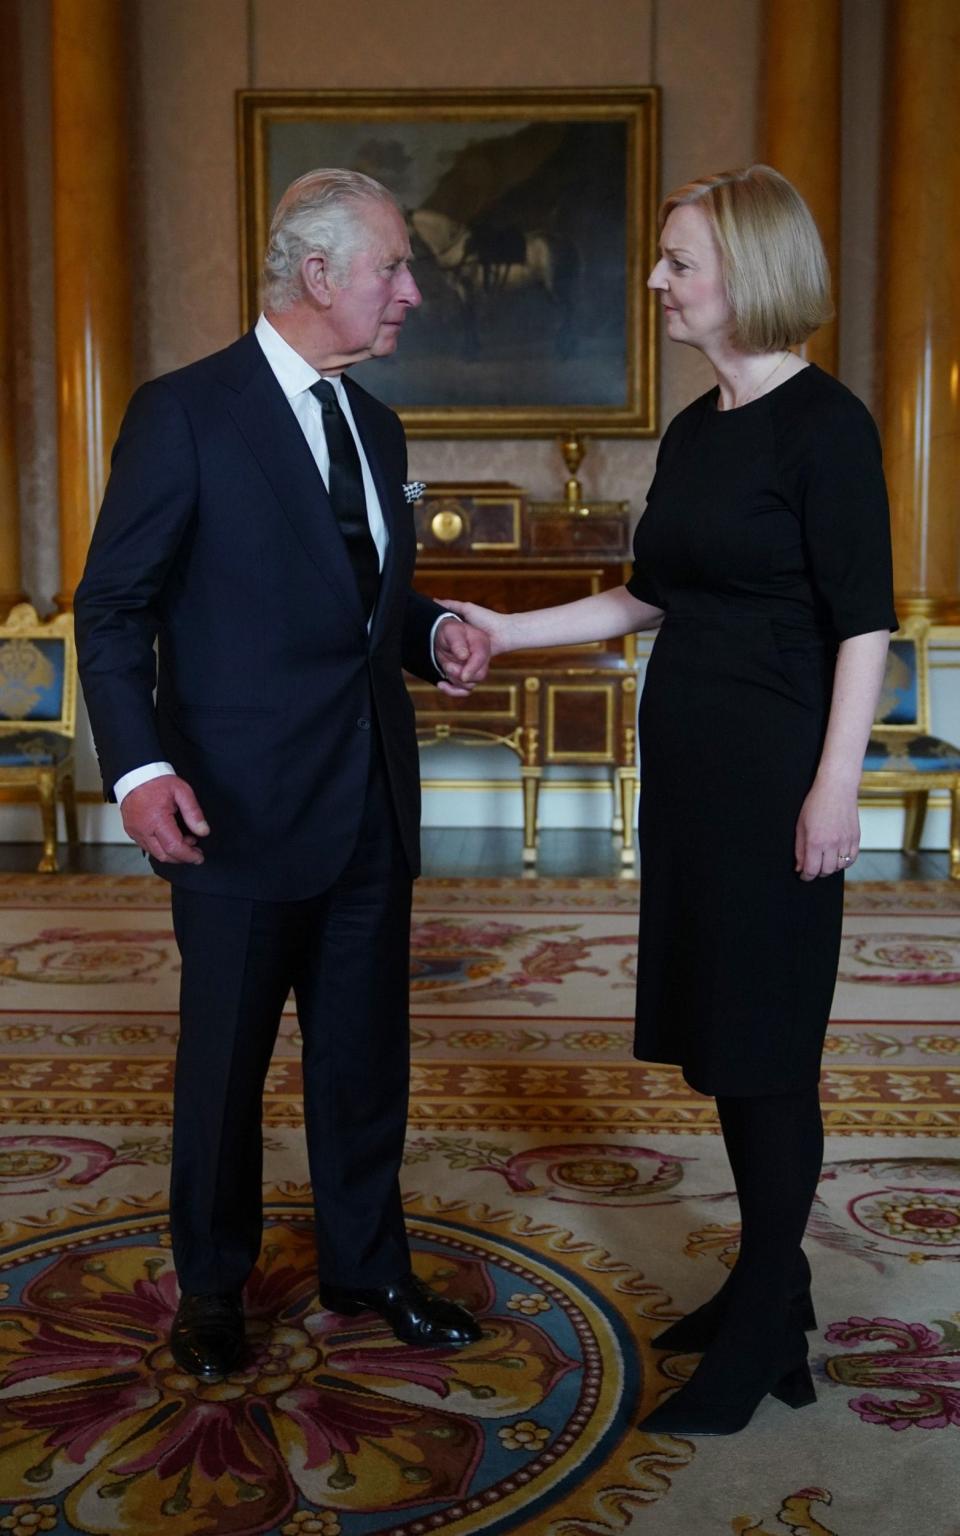 King Charles III during his first audience with Prime Minister Liz Truss at Buckingham Palace, London - Yui Mok/PA